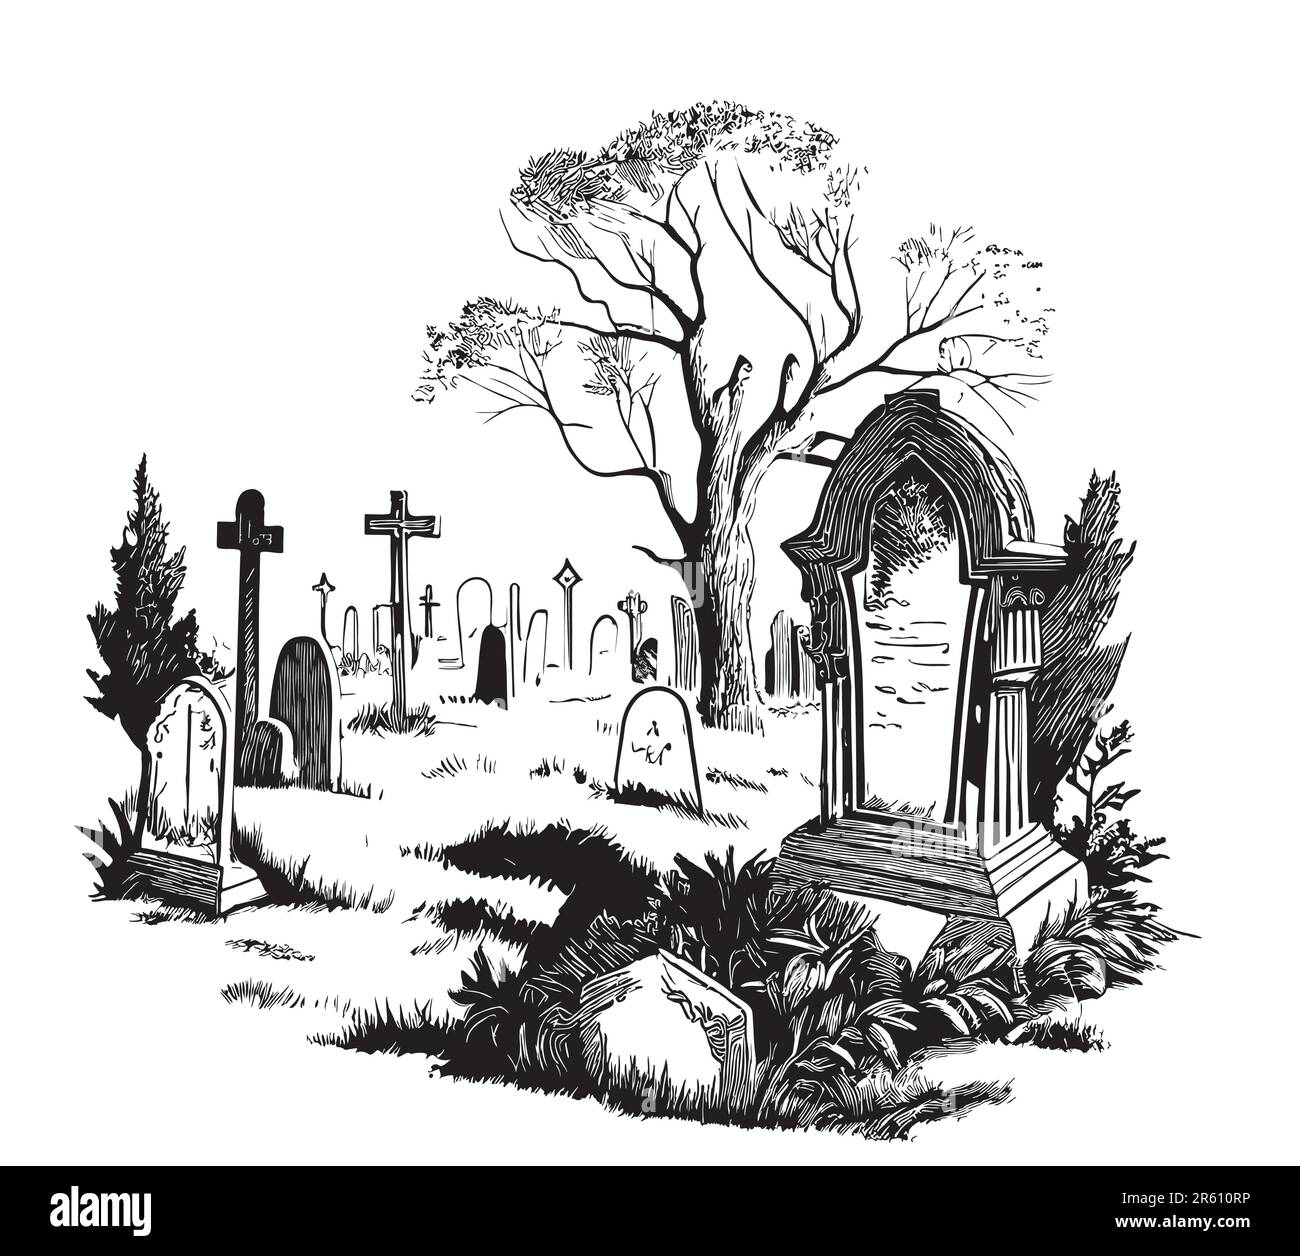 Passion4Drawing no Twitter Ghouled zombie ghoukl cemetery  coloringbook undead graveyard halloween horror horrorart twitch  twitchcreative twitchaffiliate sketch draw conceptart  dungeonsanddragons conceptartist dailysketch fantasyart 